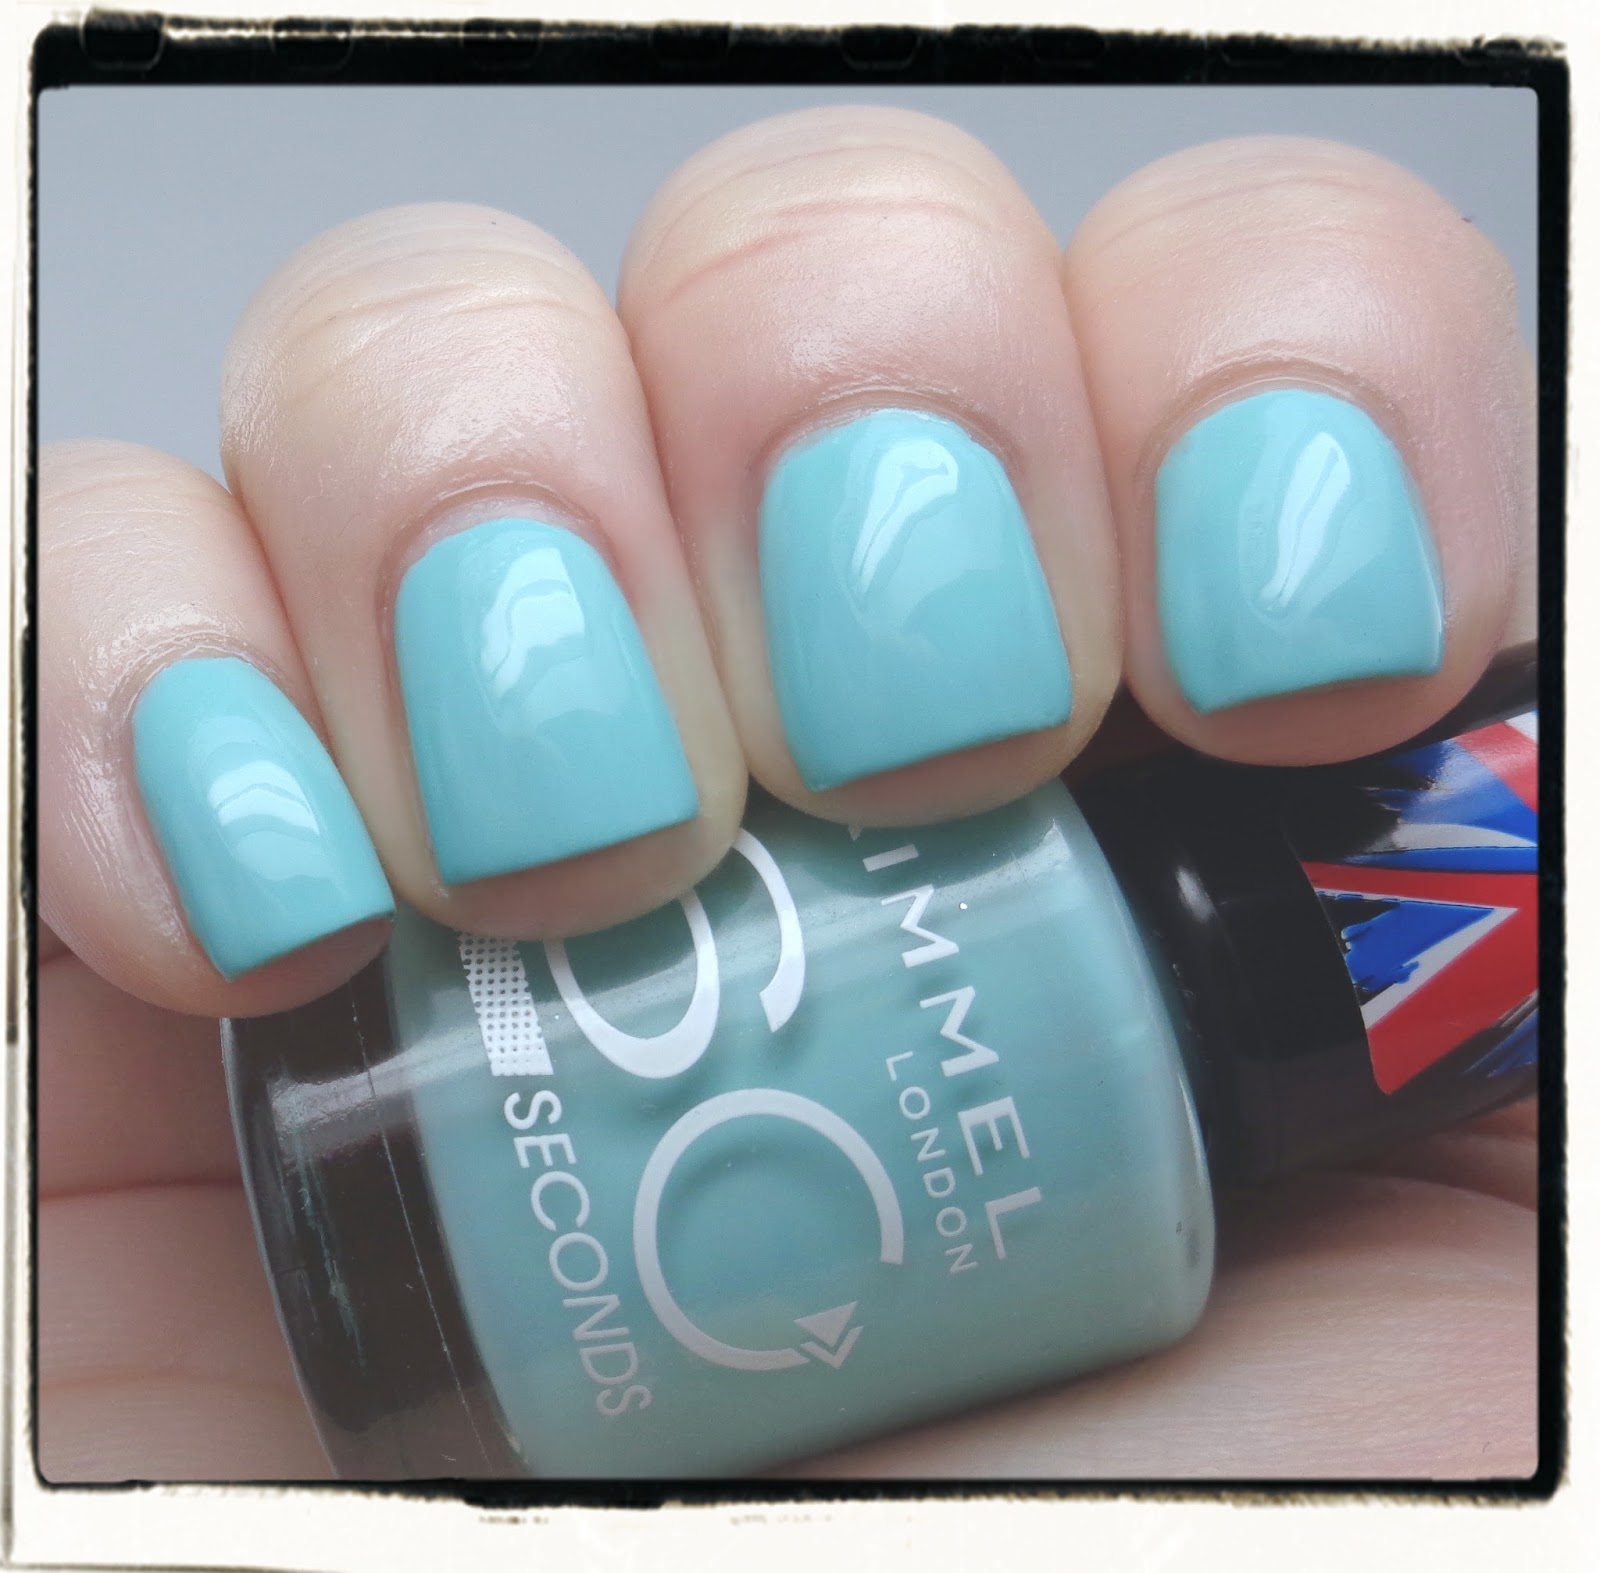 Rimmel London Precious Stones Glitter Nail Polish Review - Indian Beauty  Forever